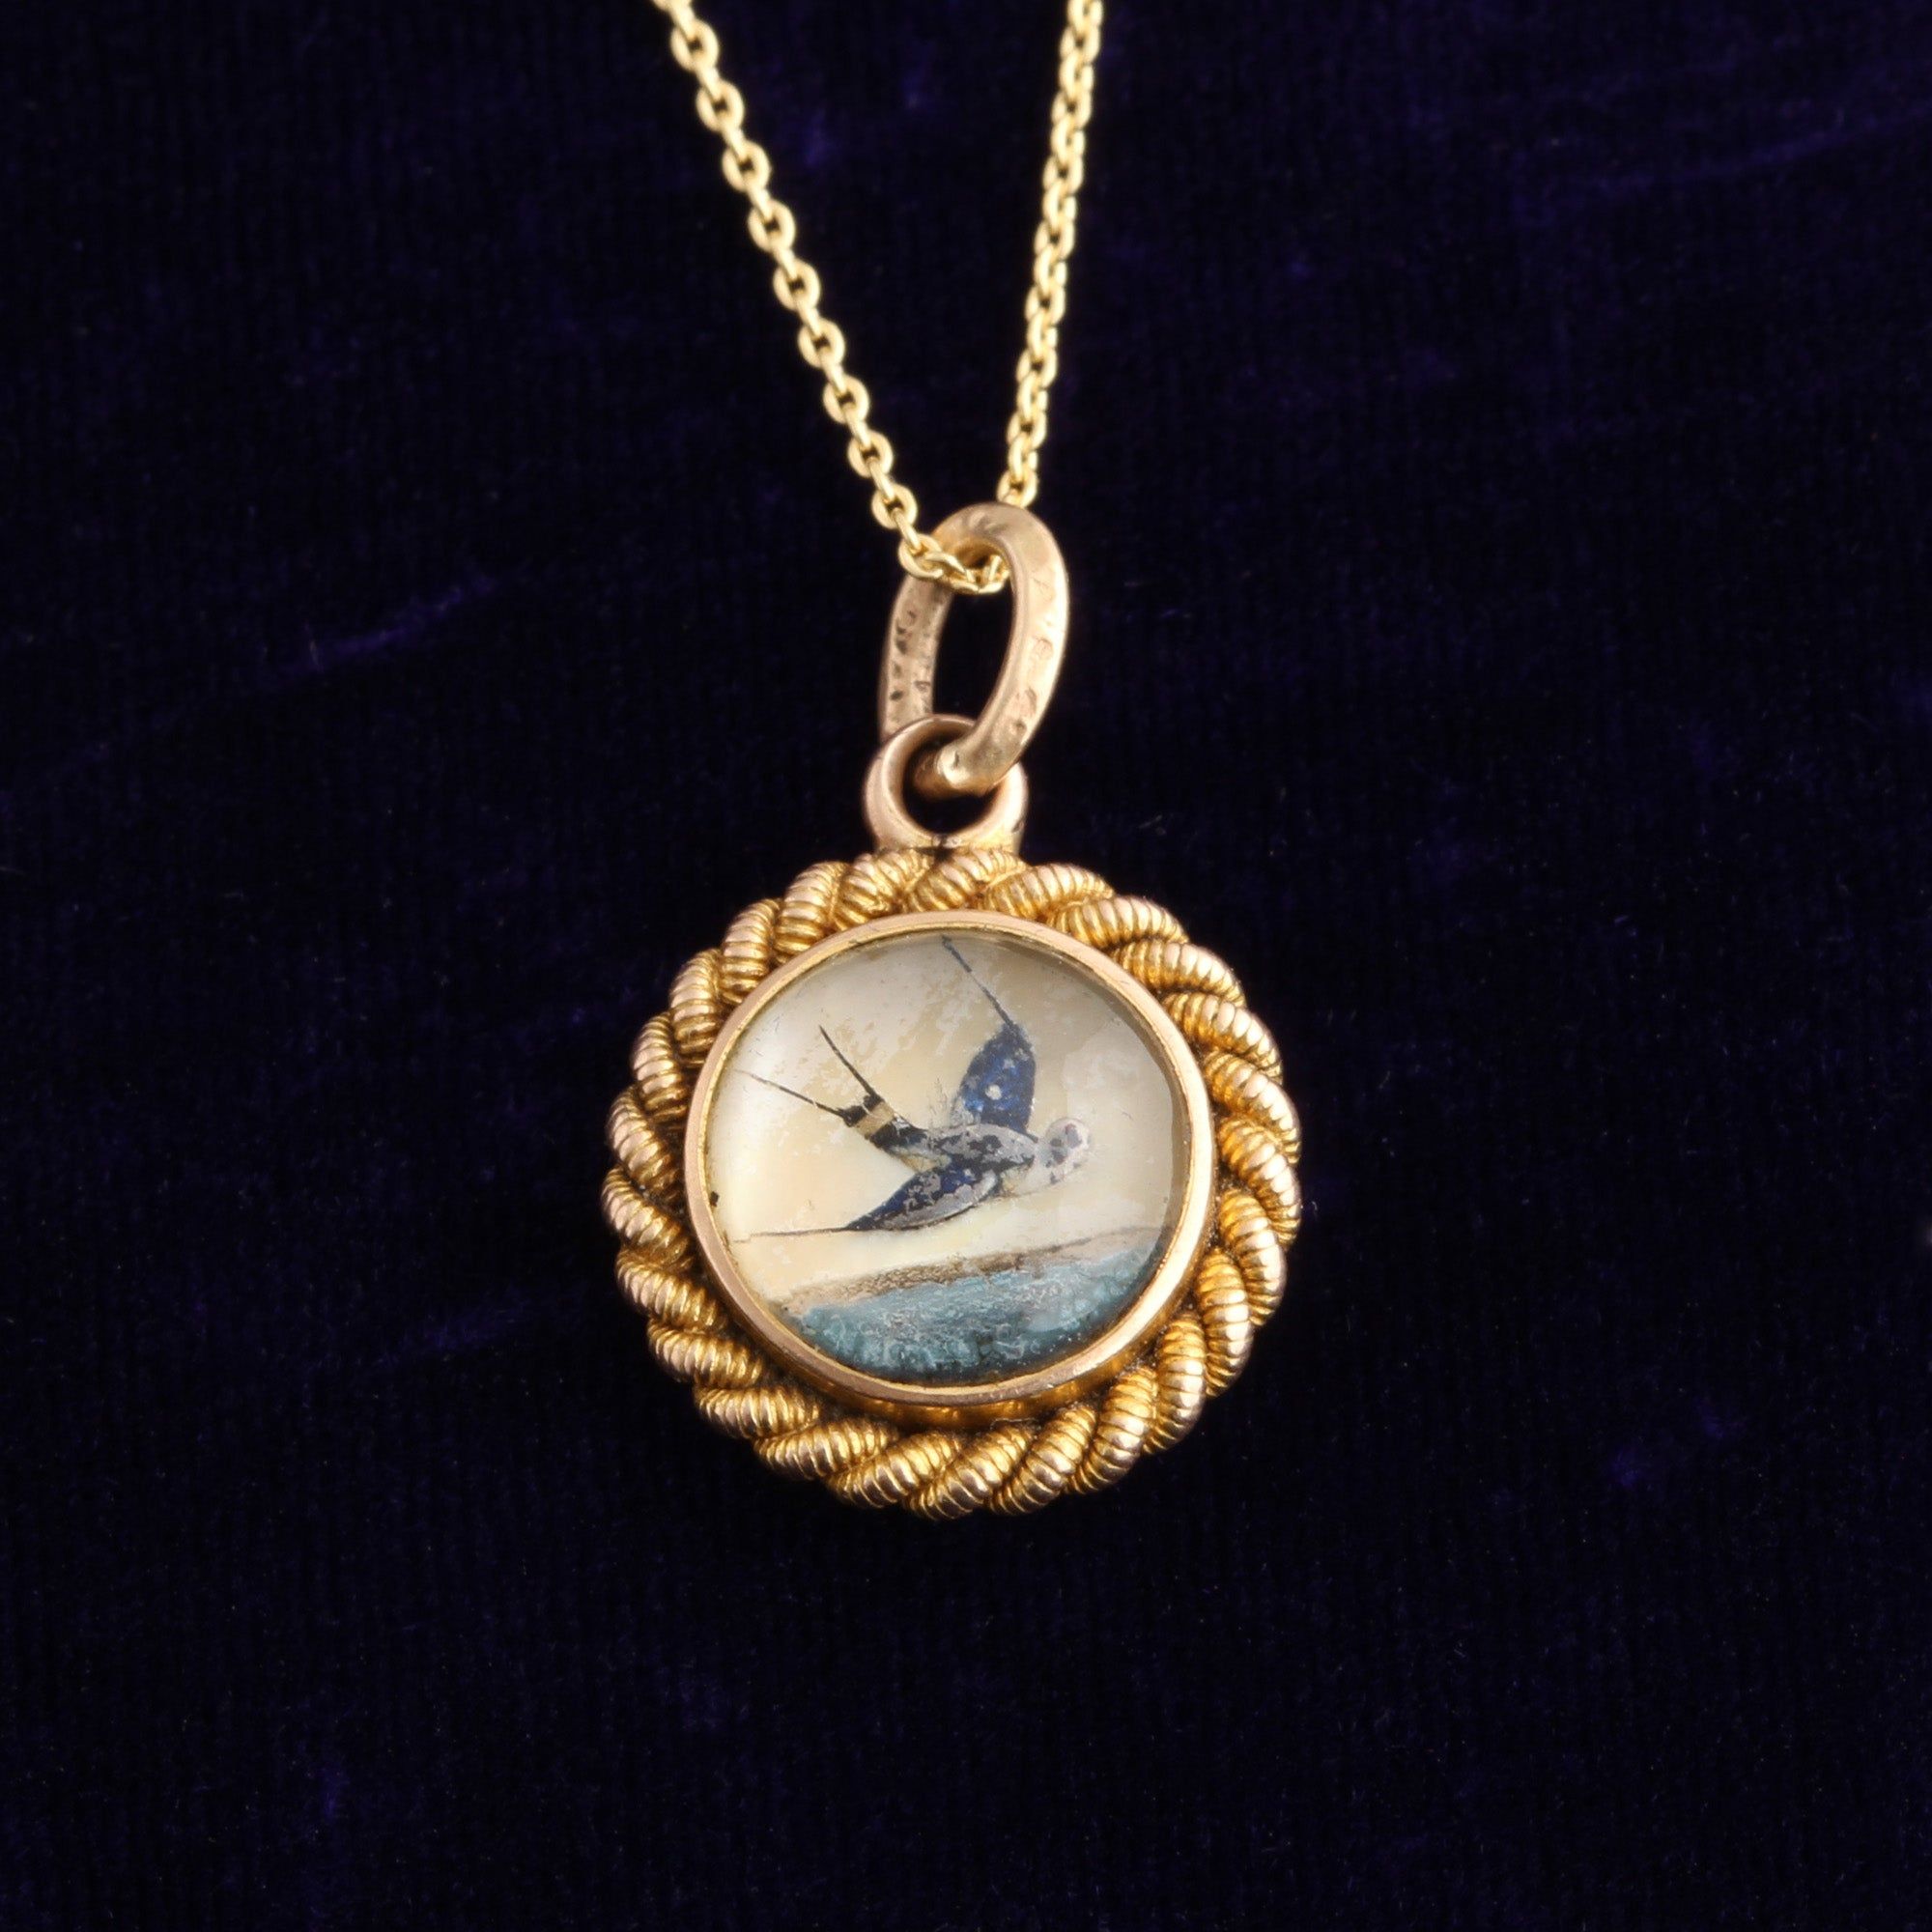 Victorian Reverse-Painted Swallow Pendant